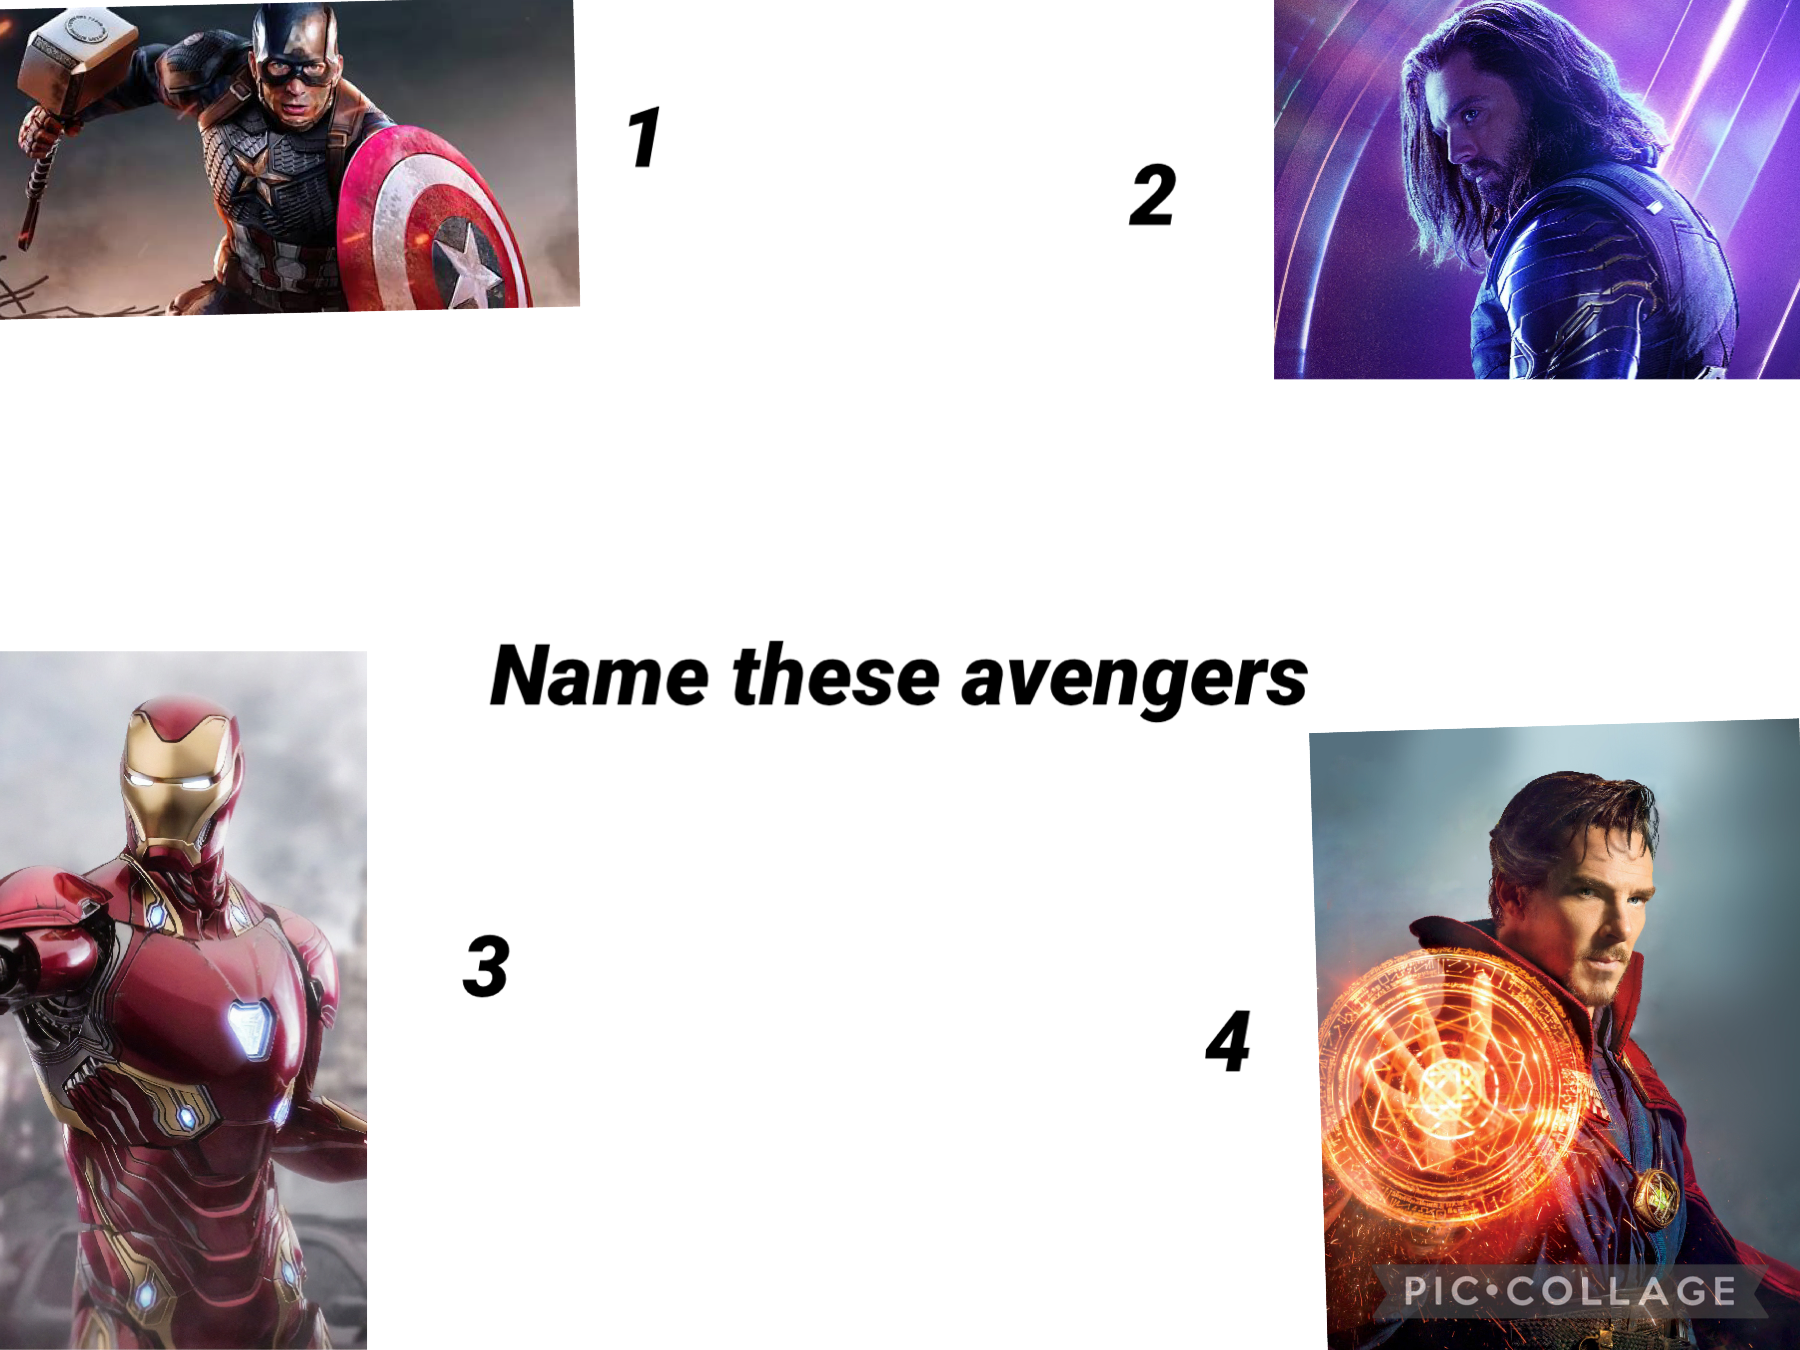 Try to guess my favorite avenger and my least (so put it from least to greatest)